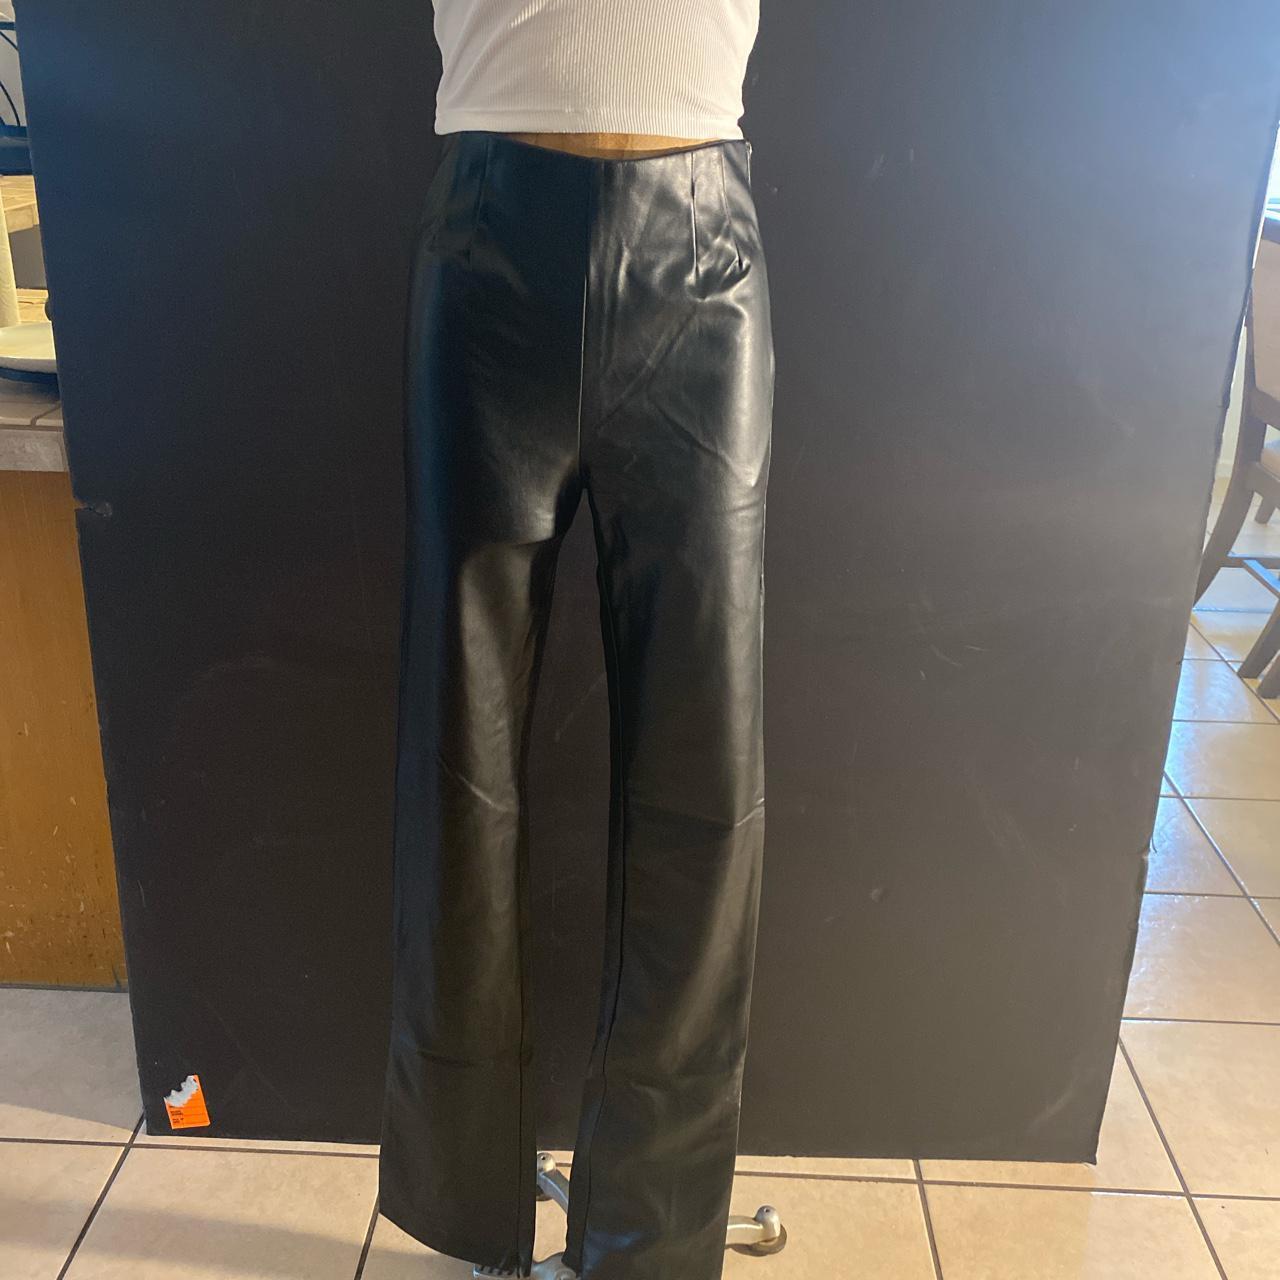 Zara faux leather pants size medium new with tags - Depop